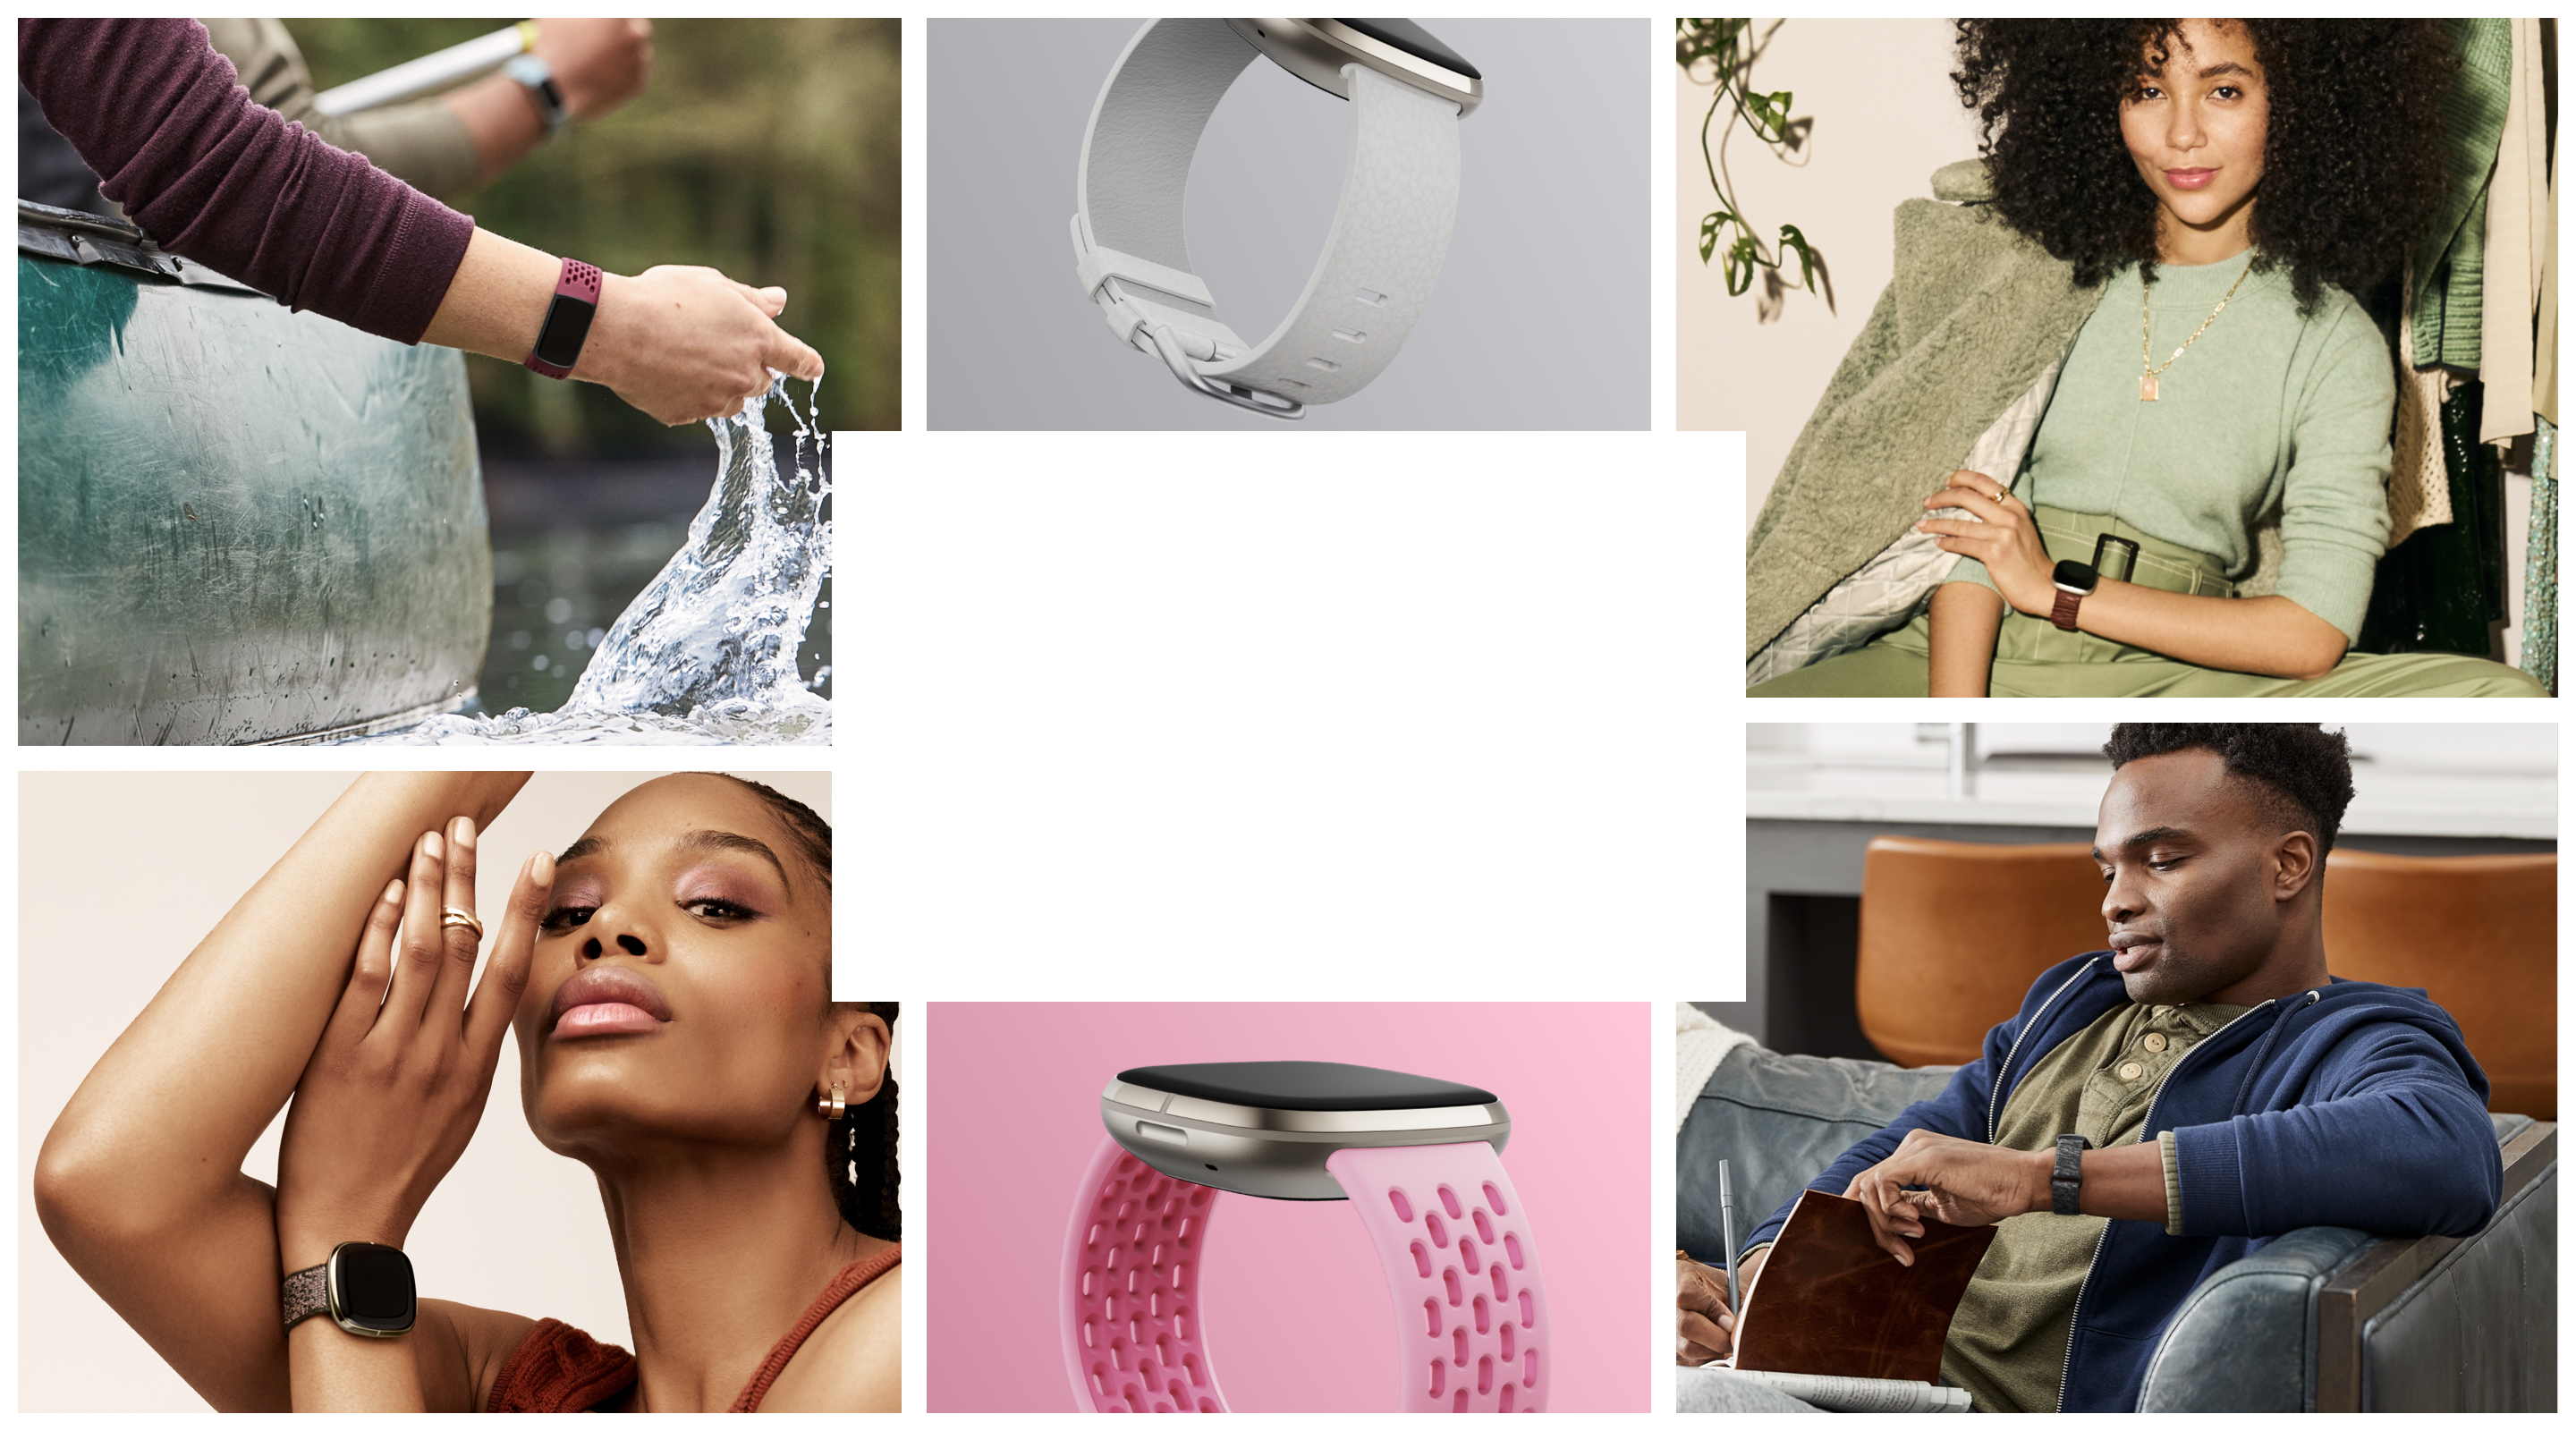 Various people wearing Fitbit devices and bands